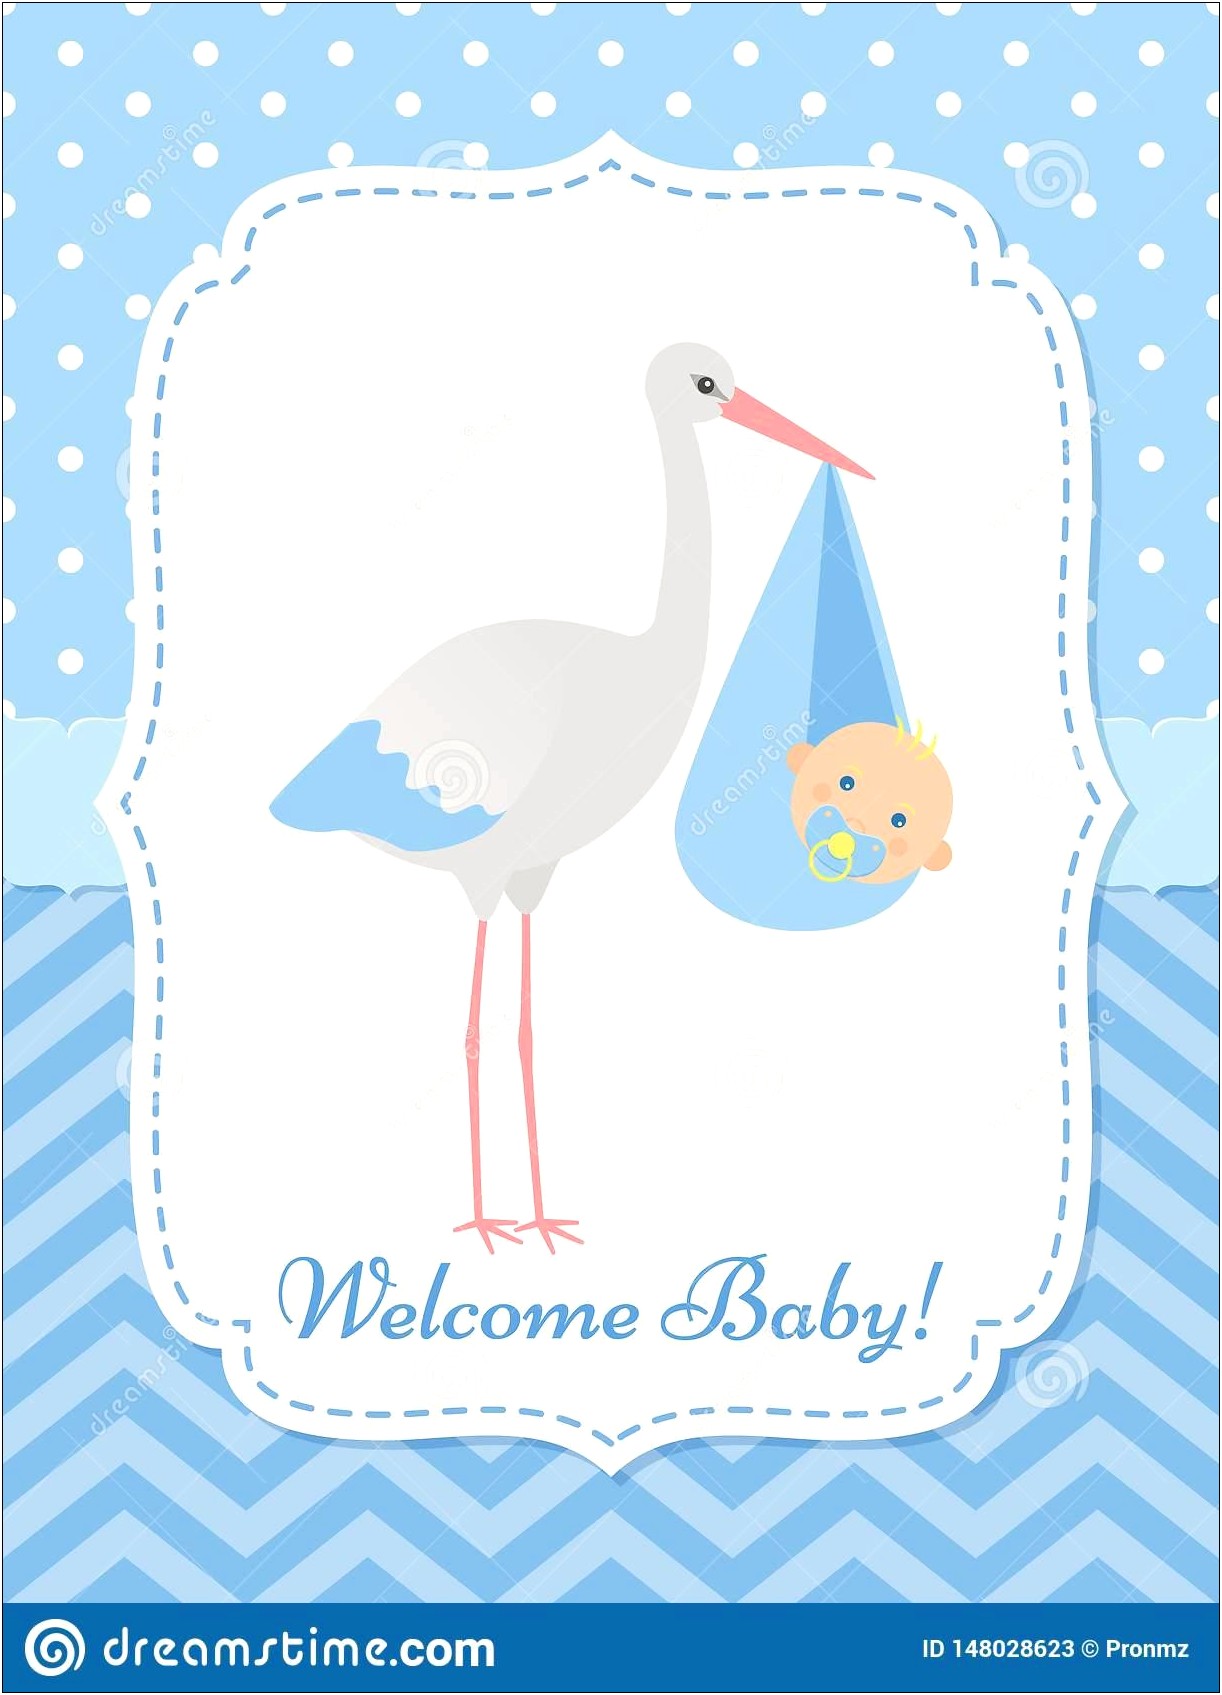 Free Baby Templates For Card Making